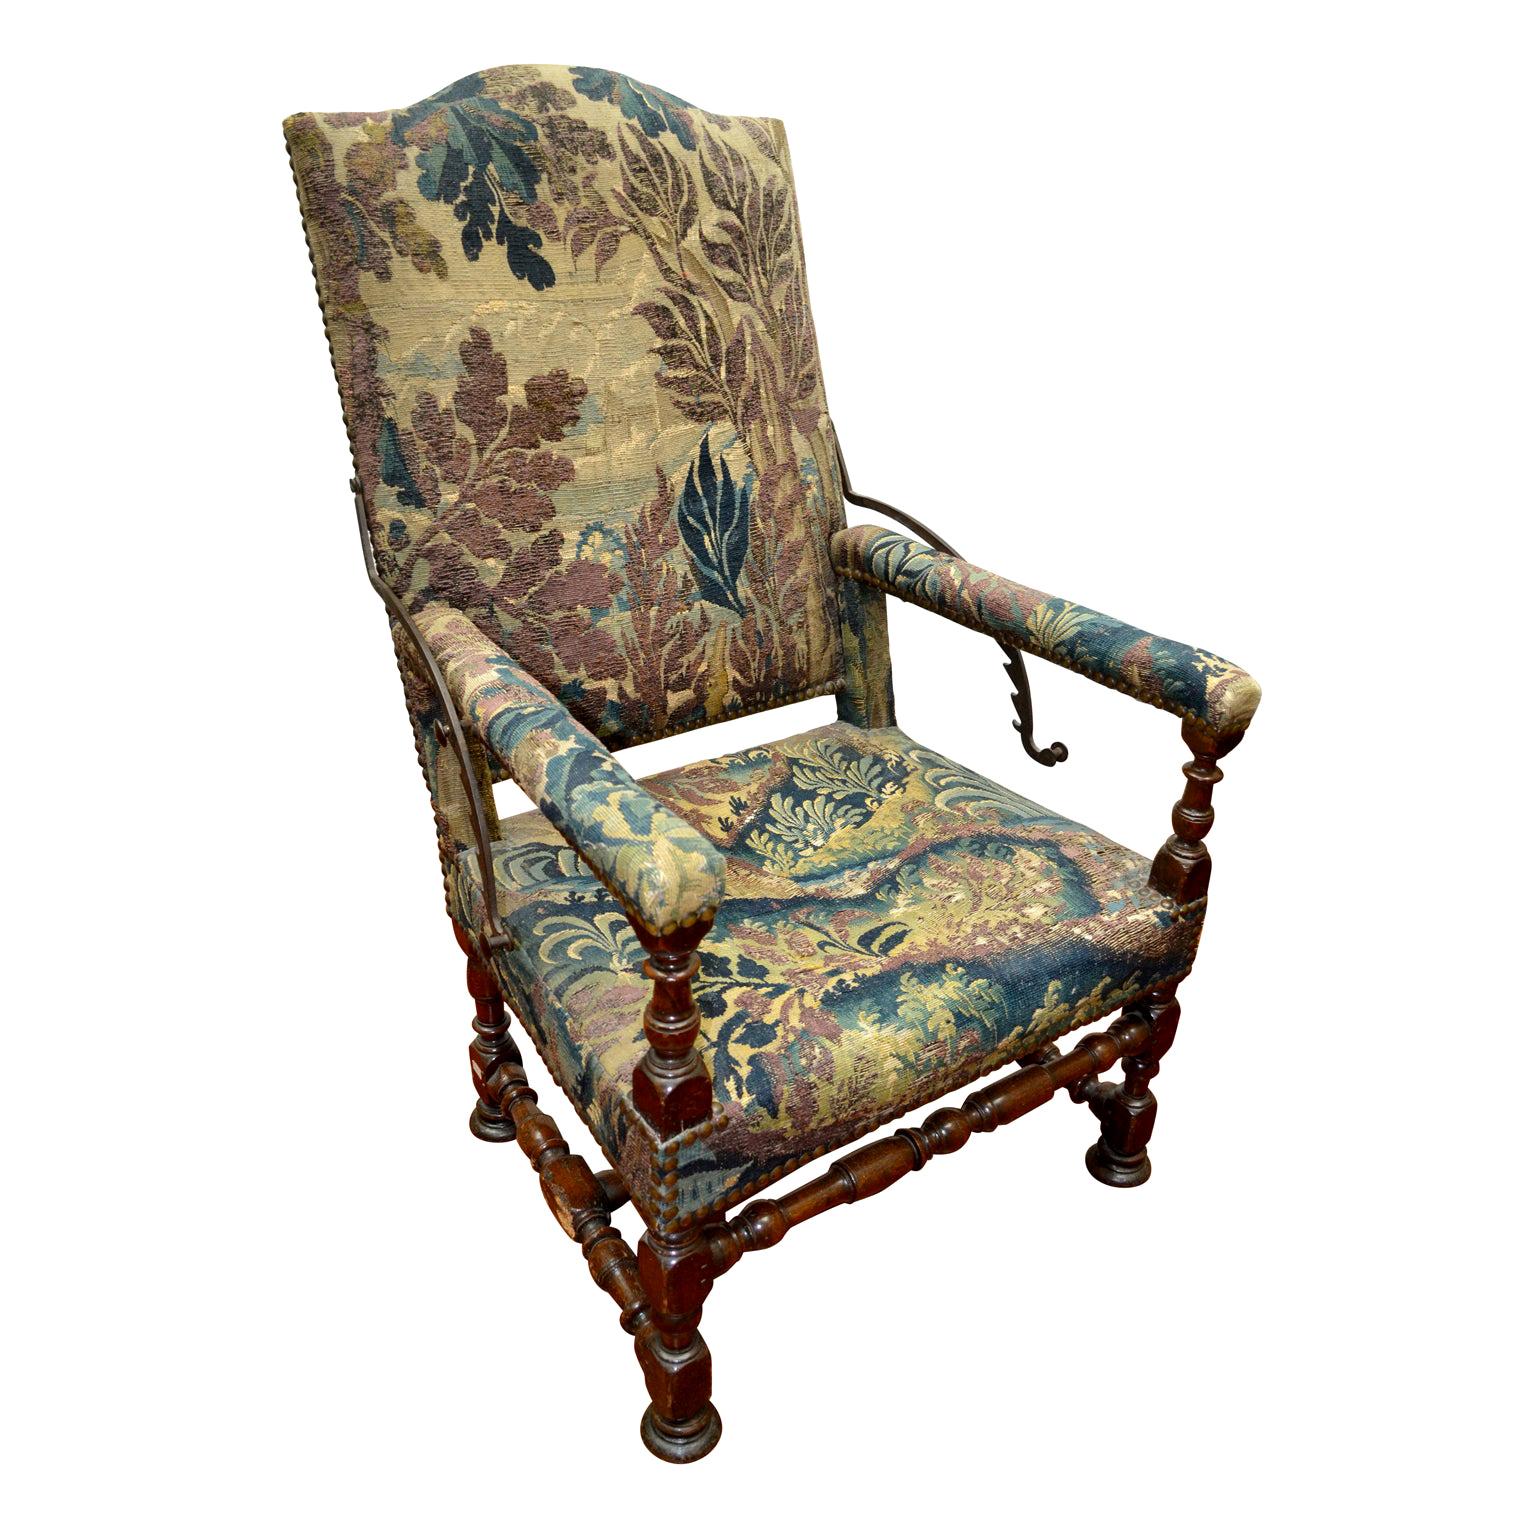 French Tapestry Reclining Armchair, a Veritable Medieval La-Z-boy For Sale